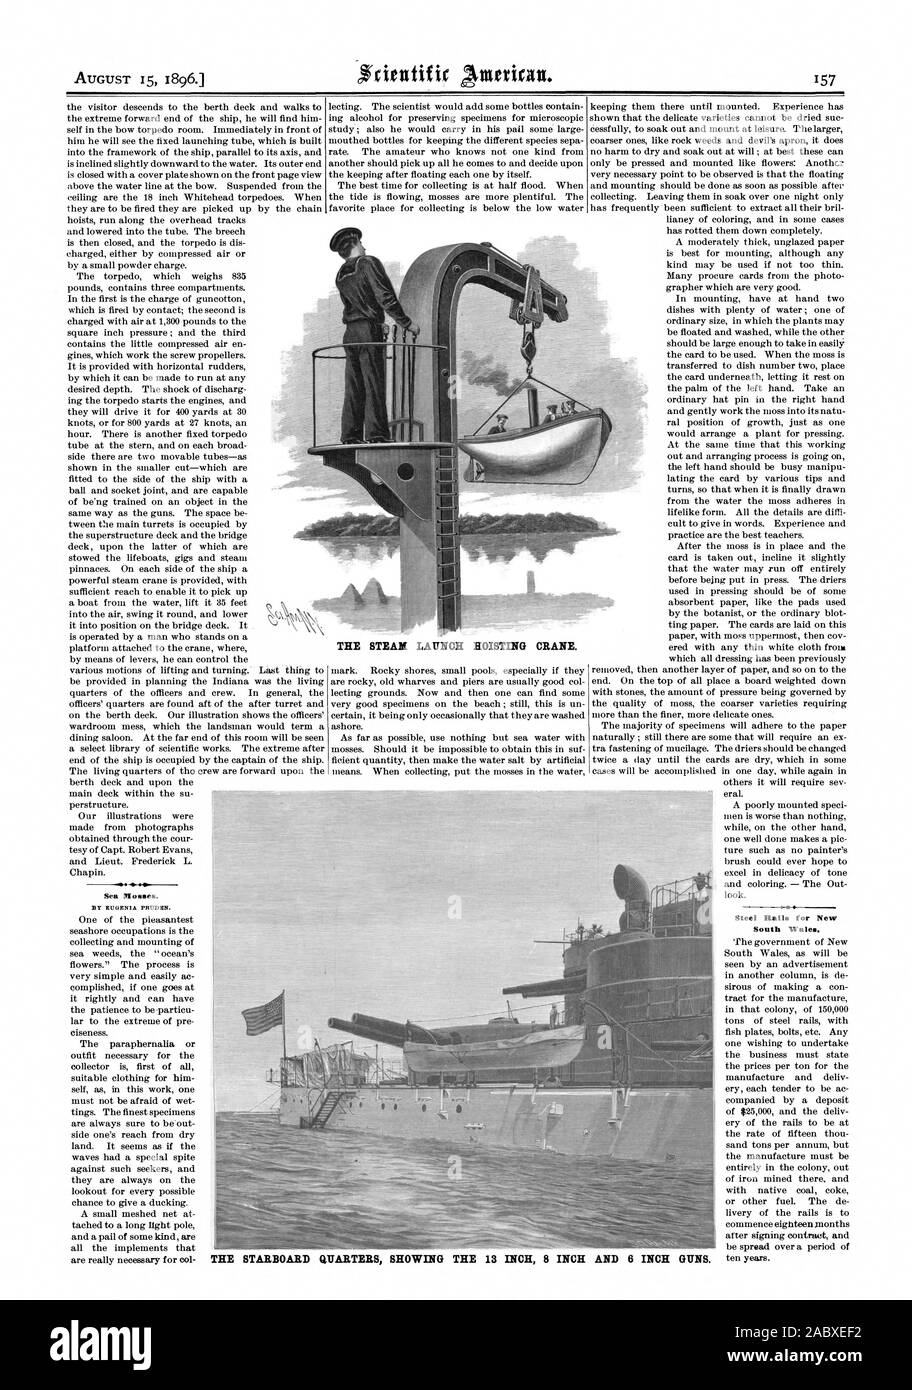 Sea Mosses. Steel Rails for New South Wales. THE STEAM LAUNCH HOISTING CRANE. THE STARBOARD QUARTERS SHOWING THE 13 INCH 8 INCH AND 6 INCH GUNS., scientific american, 1896-08-15 Stock Photo